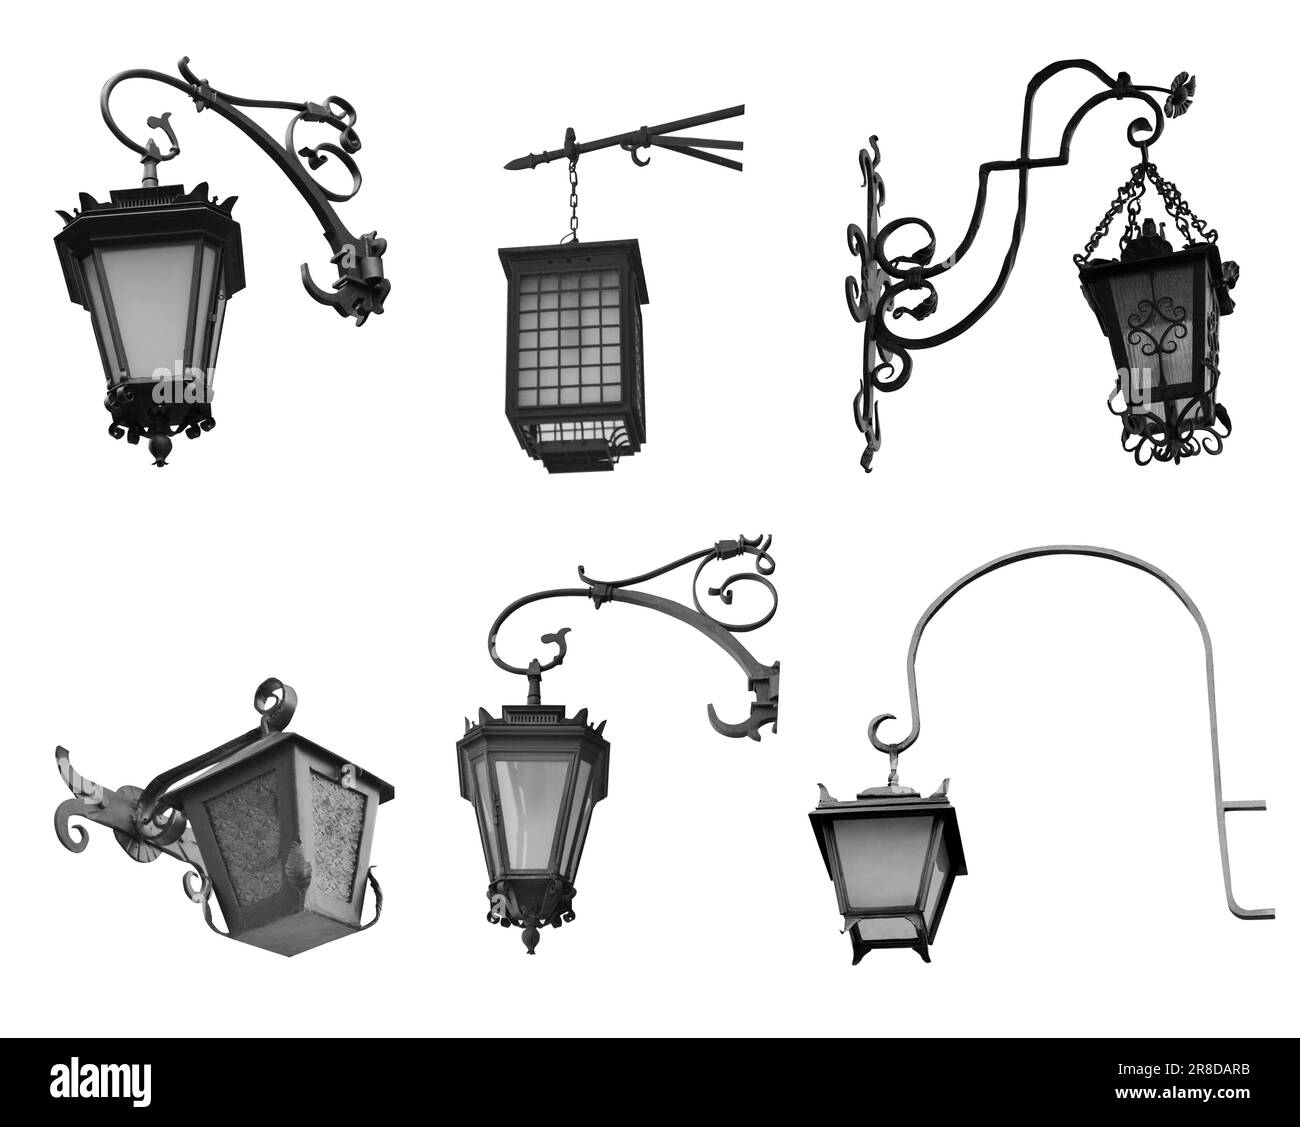 Beautiful street lamps in retro style on white background, collage Stock Photo